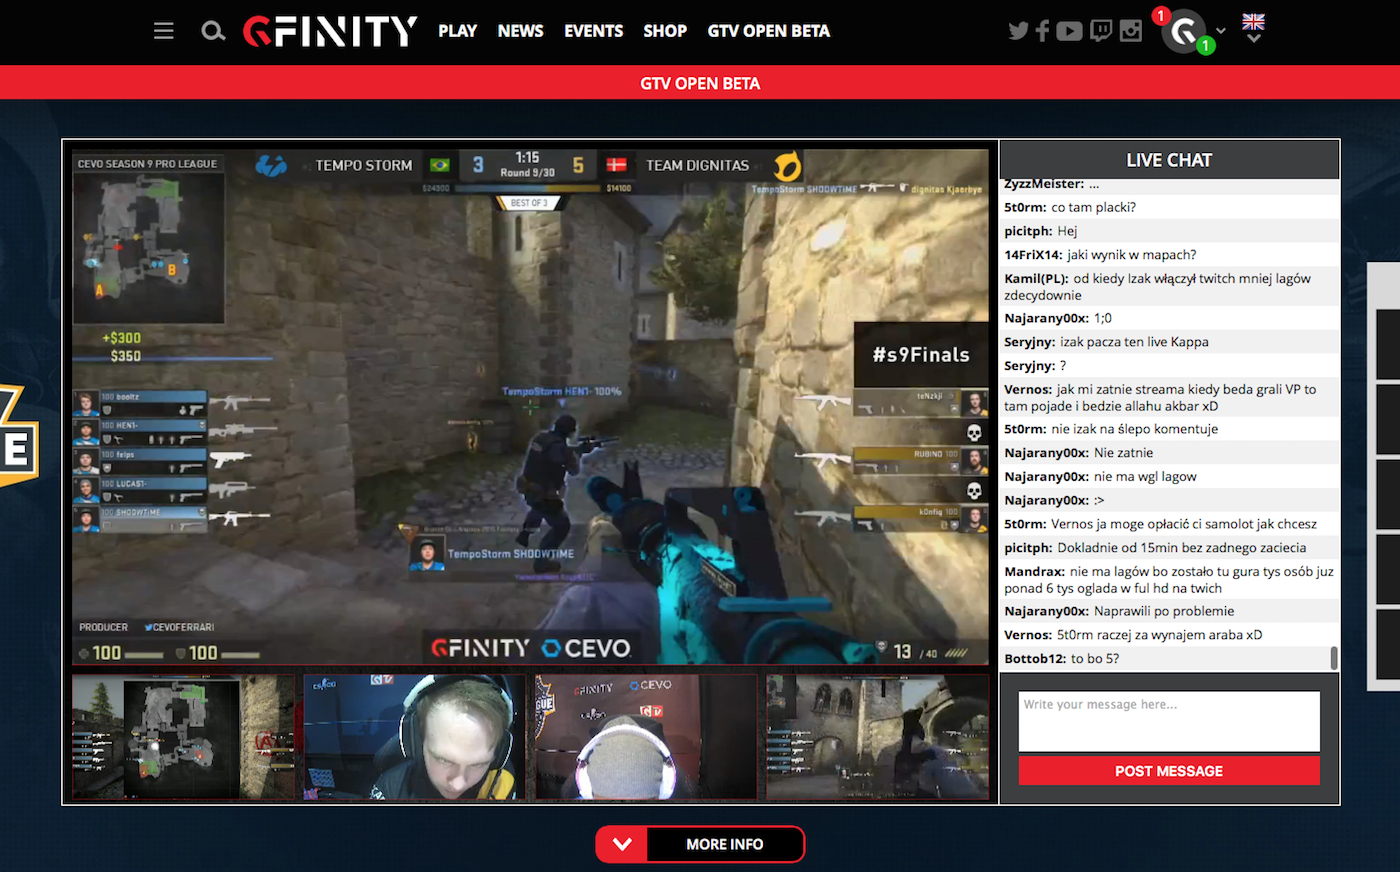 Gfinity&#039;s eSports broadcasts now offer multiple perspectives